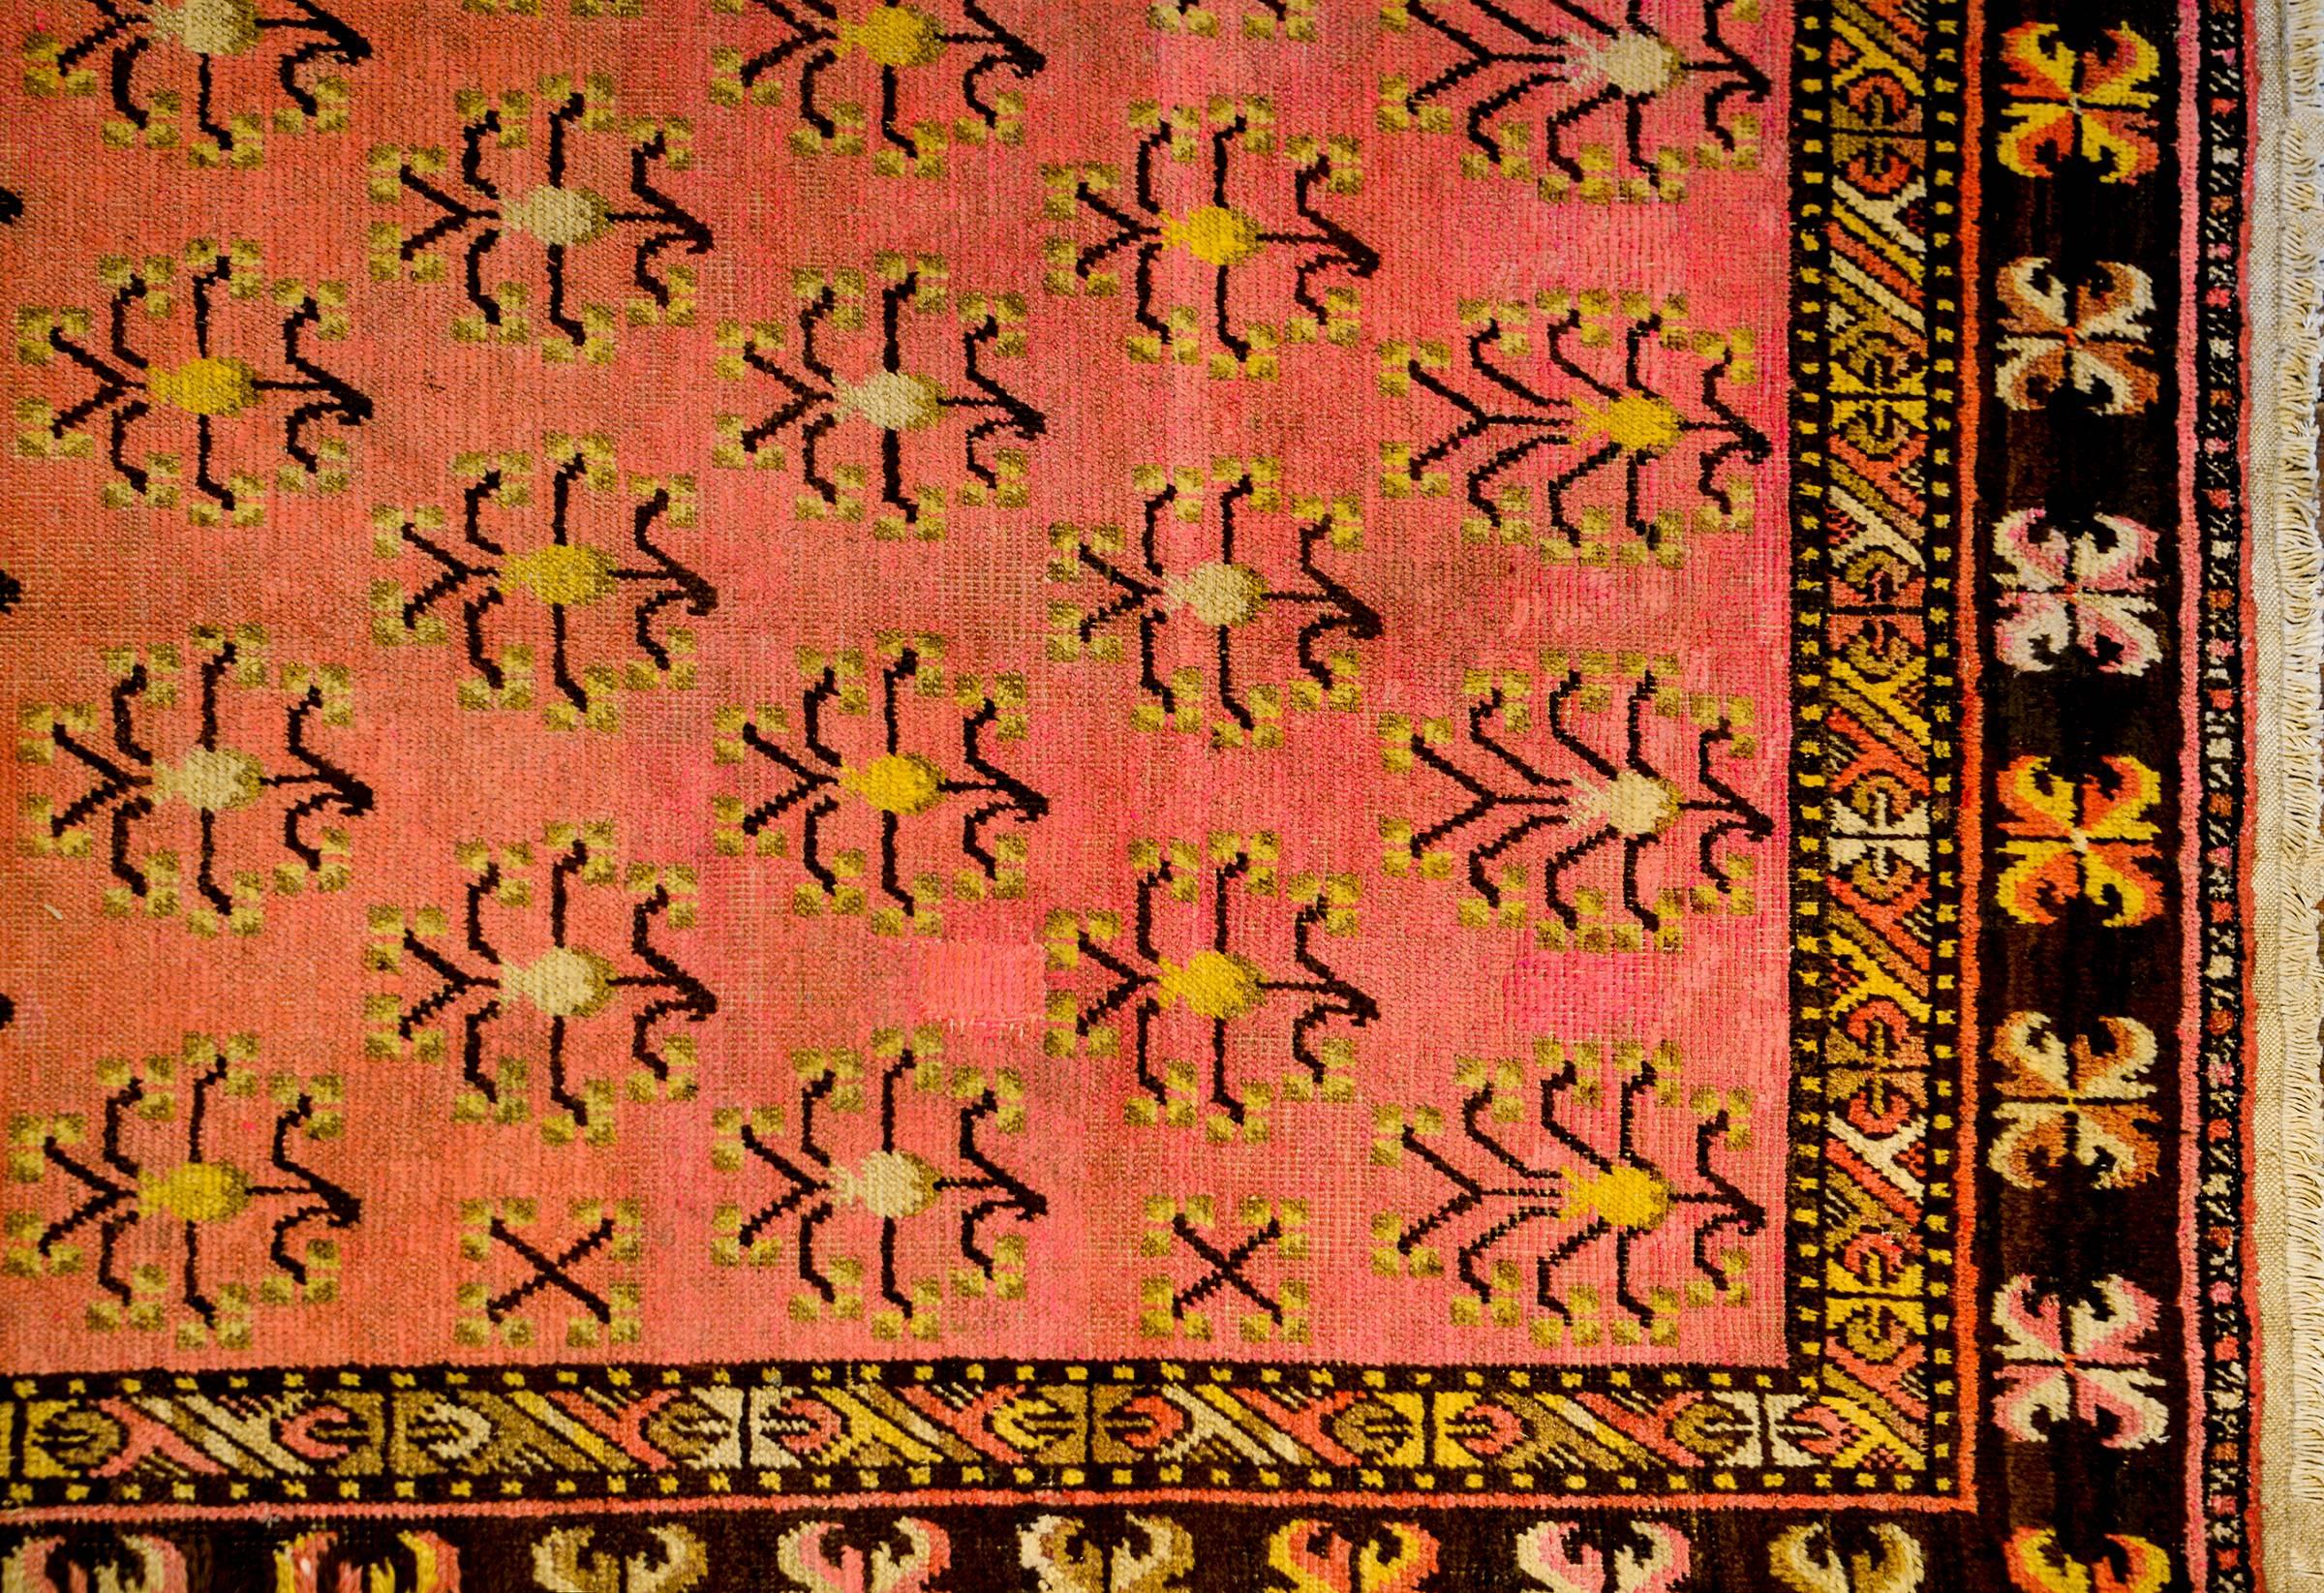 An unusual mid 20th century Central Asian Khotan rug with an interesting all-over tree-of-life pattern woven in gold and dark brown wool, on a fantastic pink background. The border is composed of four distinct patterns. The widest is a playful